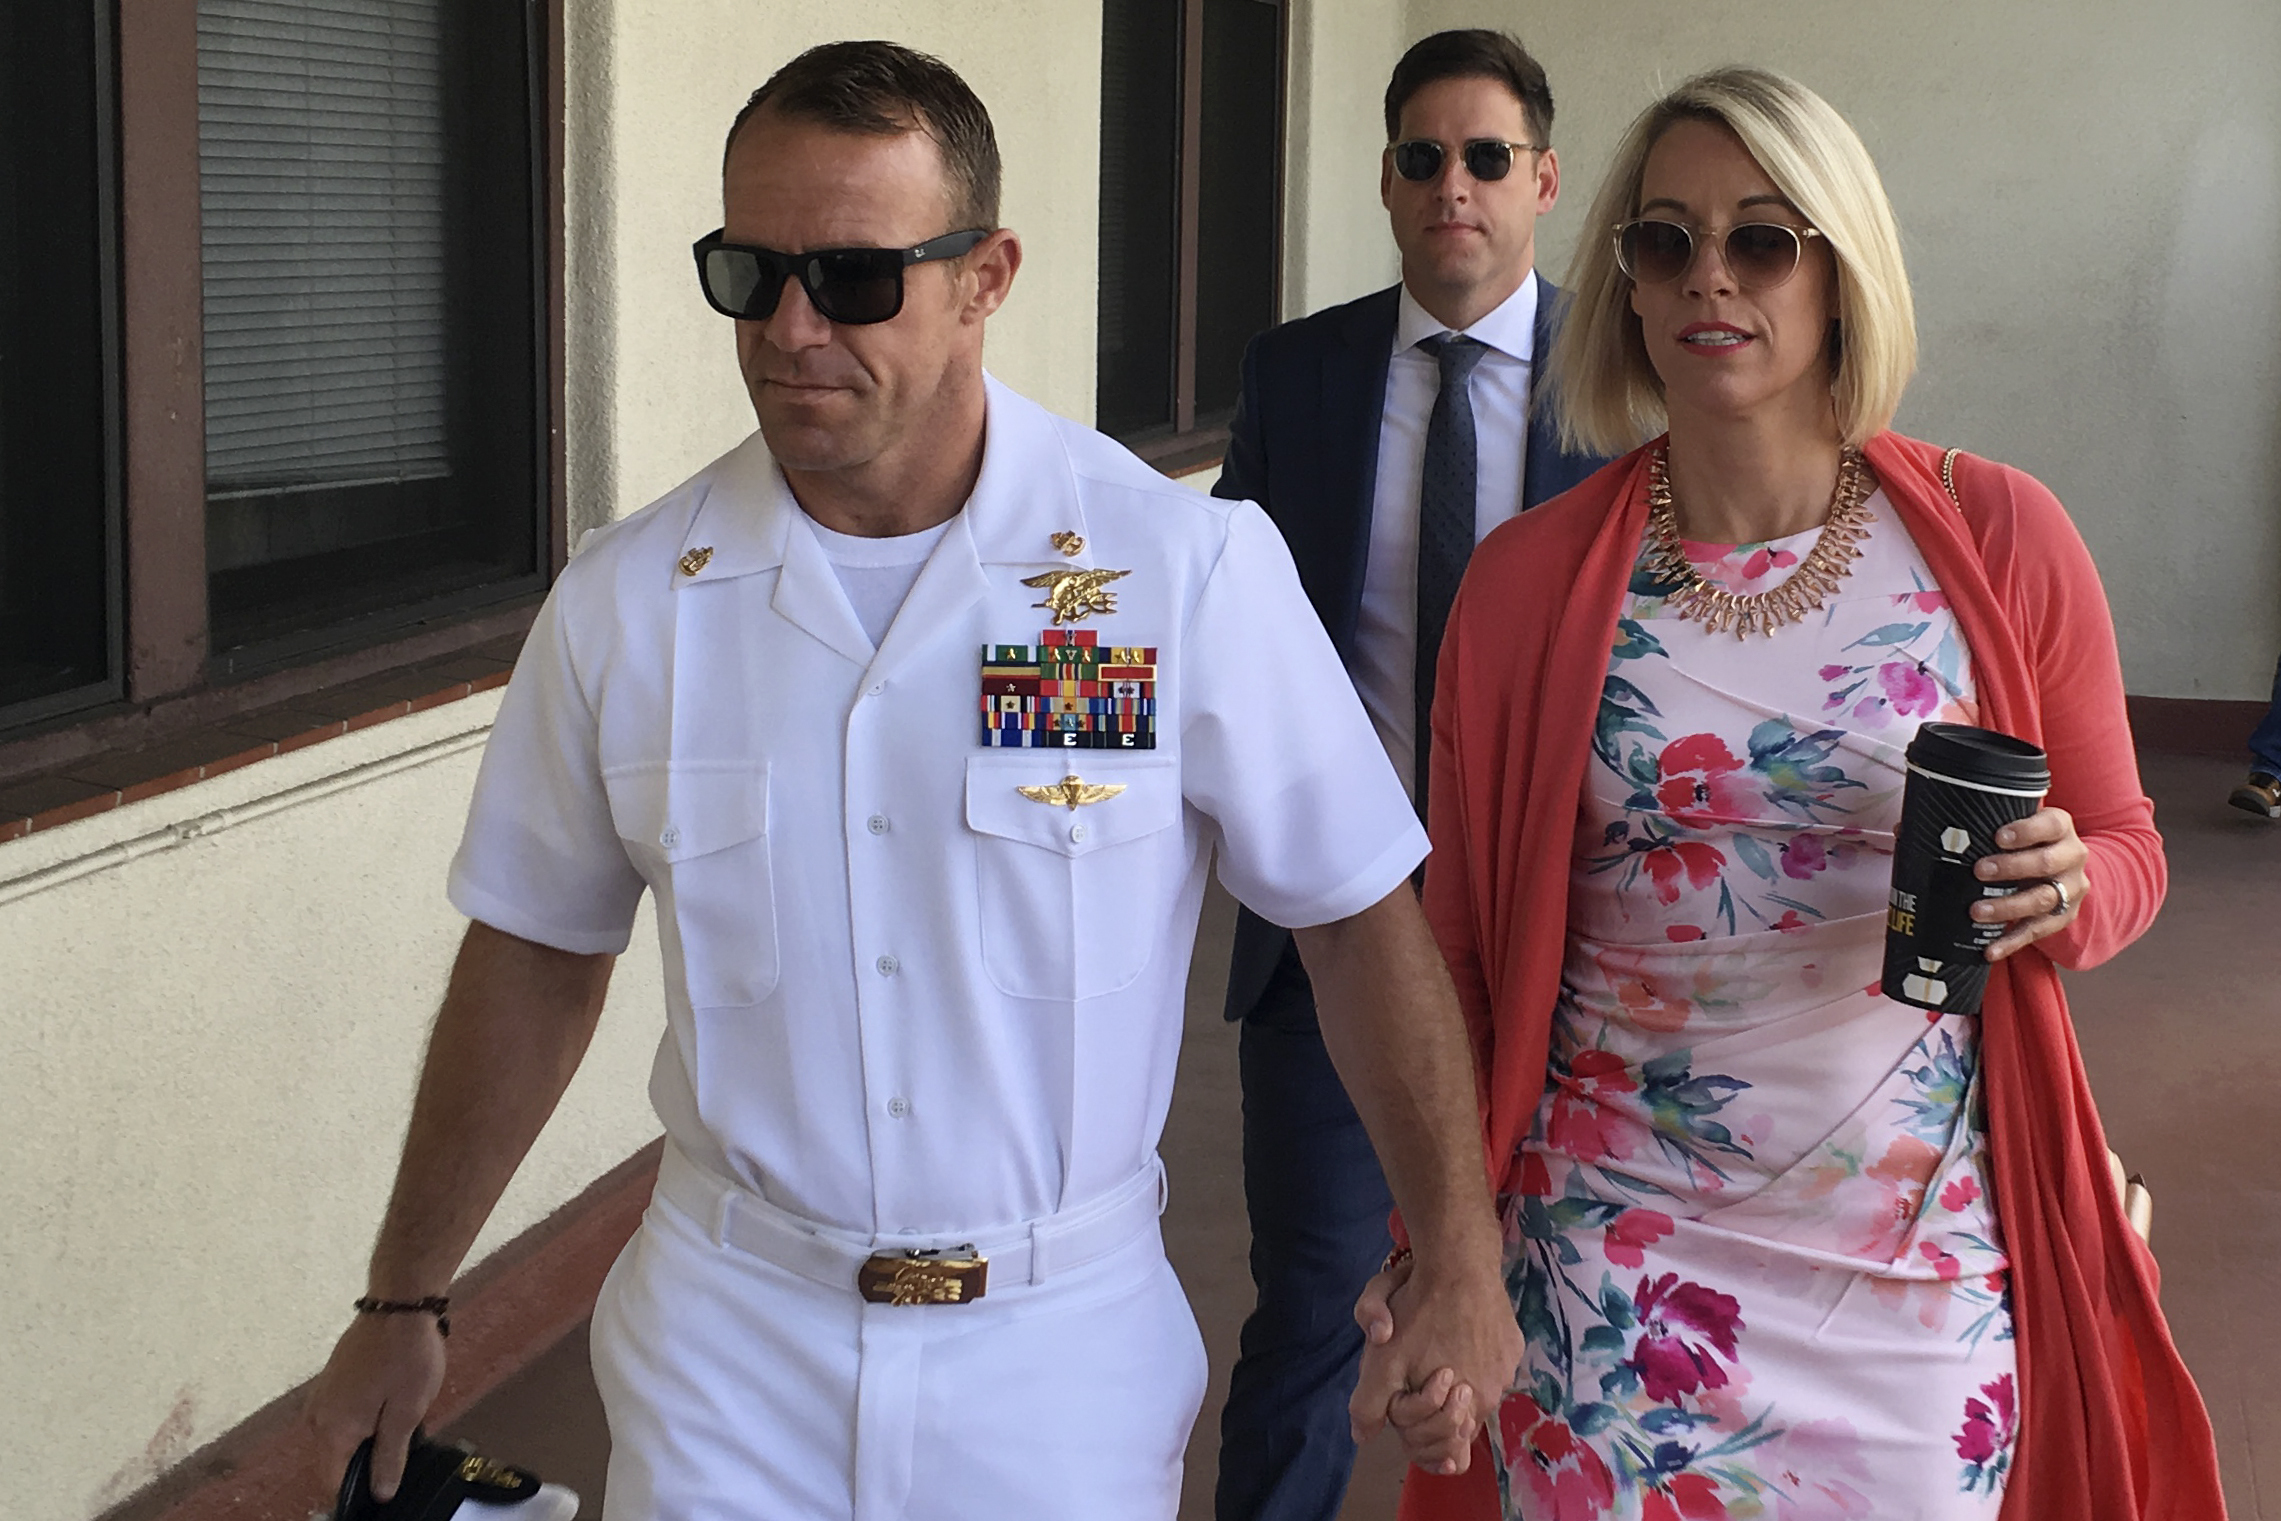 BREAKING: Navy SEAL Eddie Gallagher Found NOT GUILTY on ALL Charges